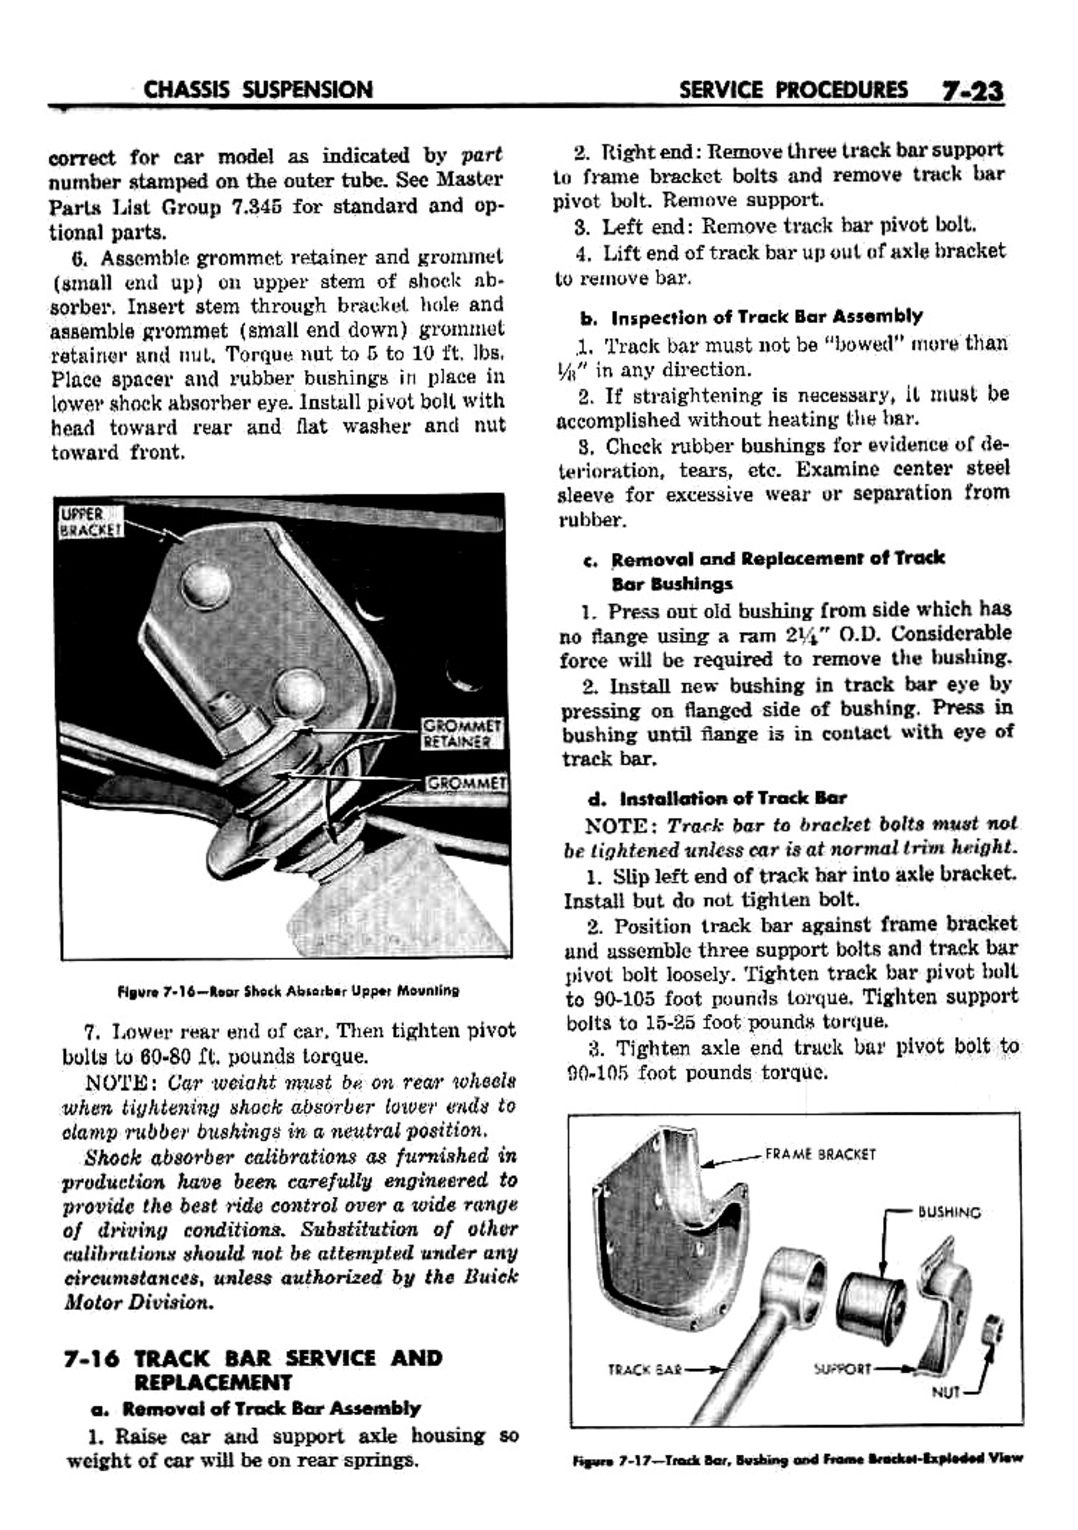 n_08 1959 Buick Shop Manual - Chassis Suspension-023-023.jpg